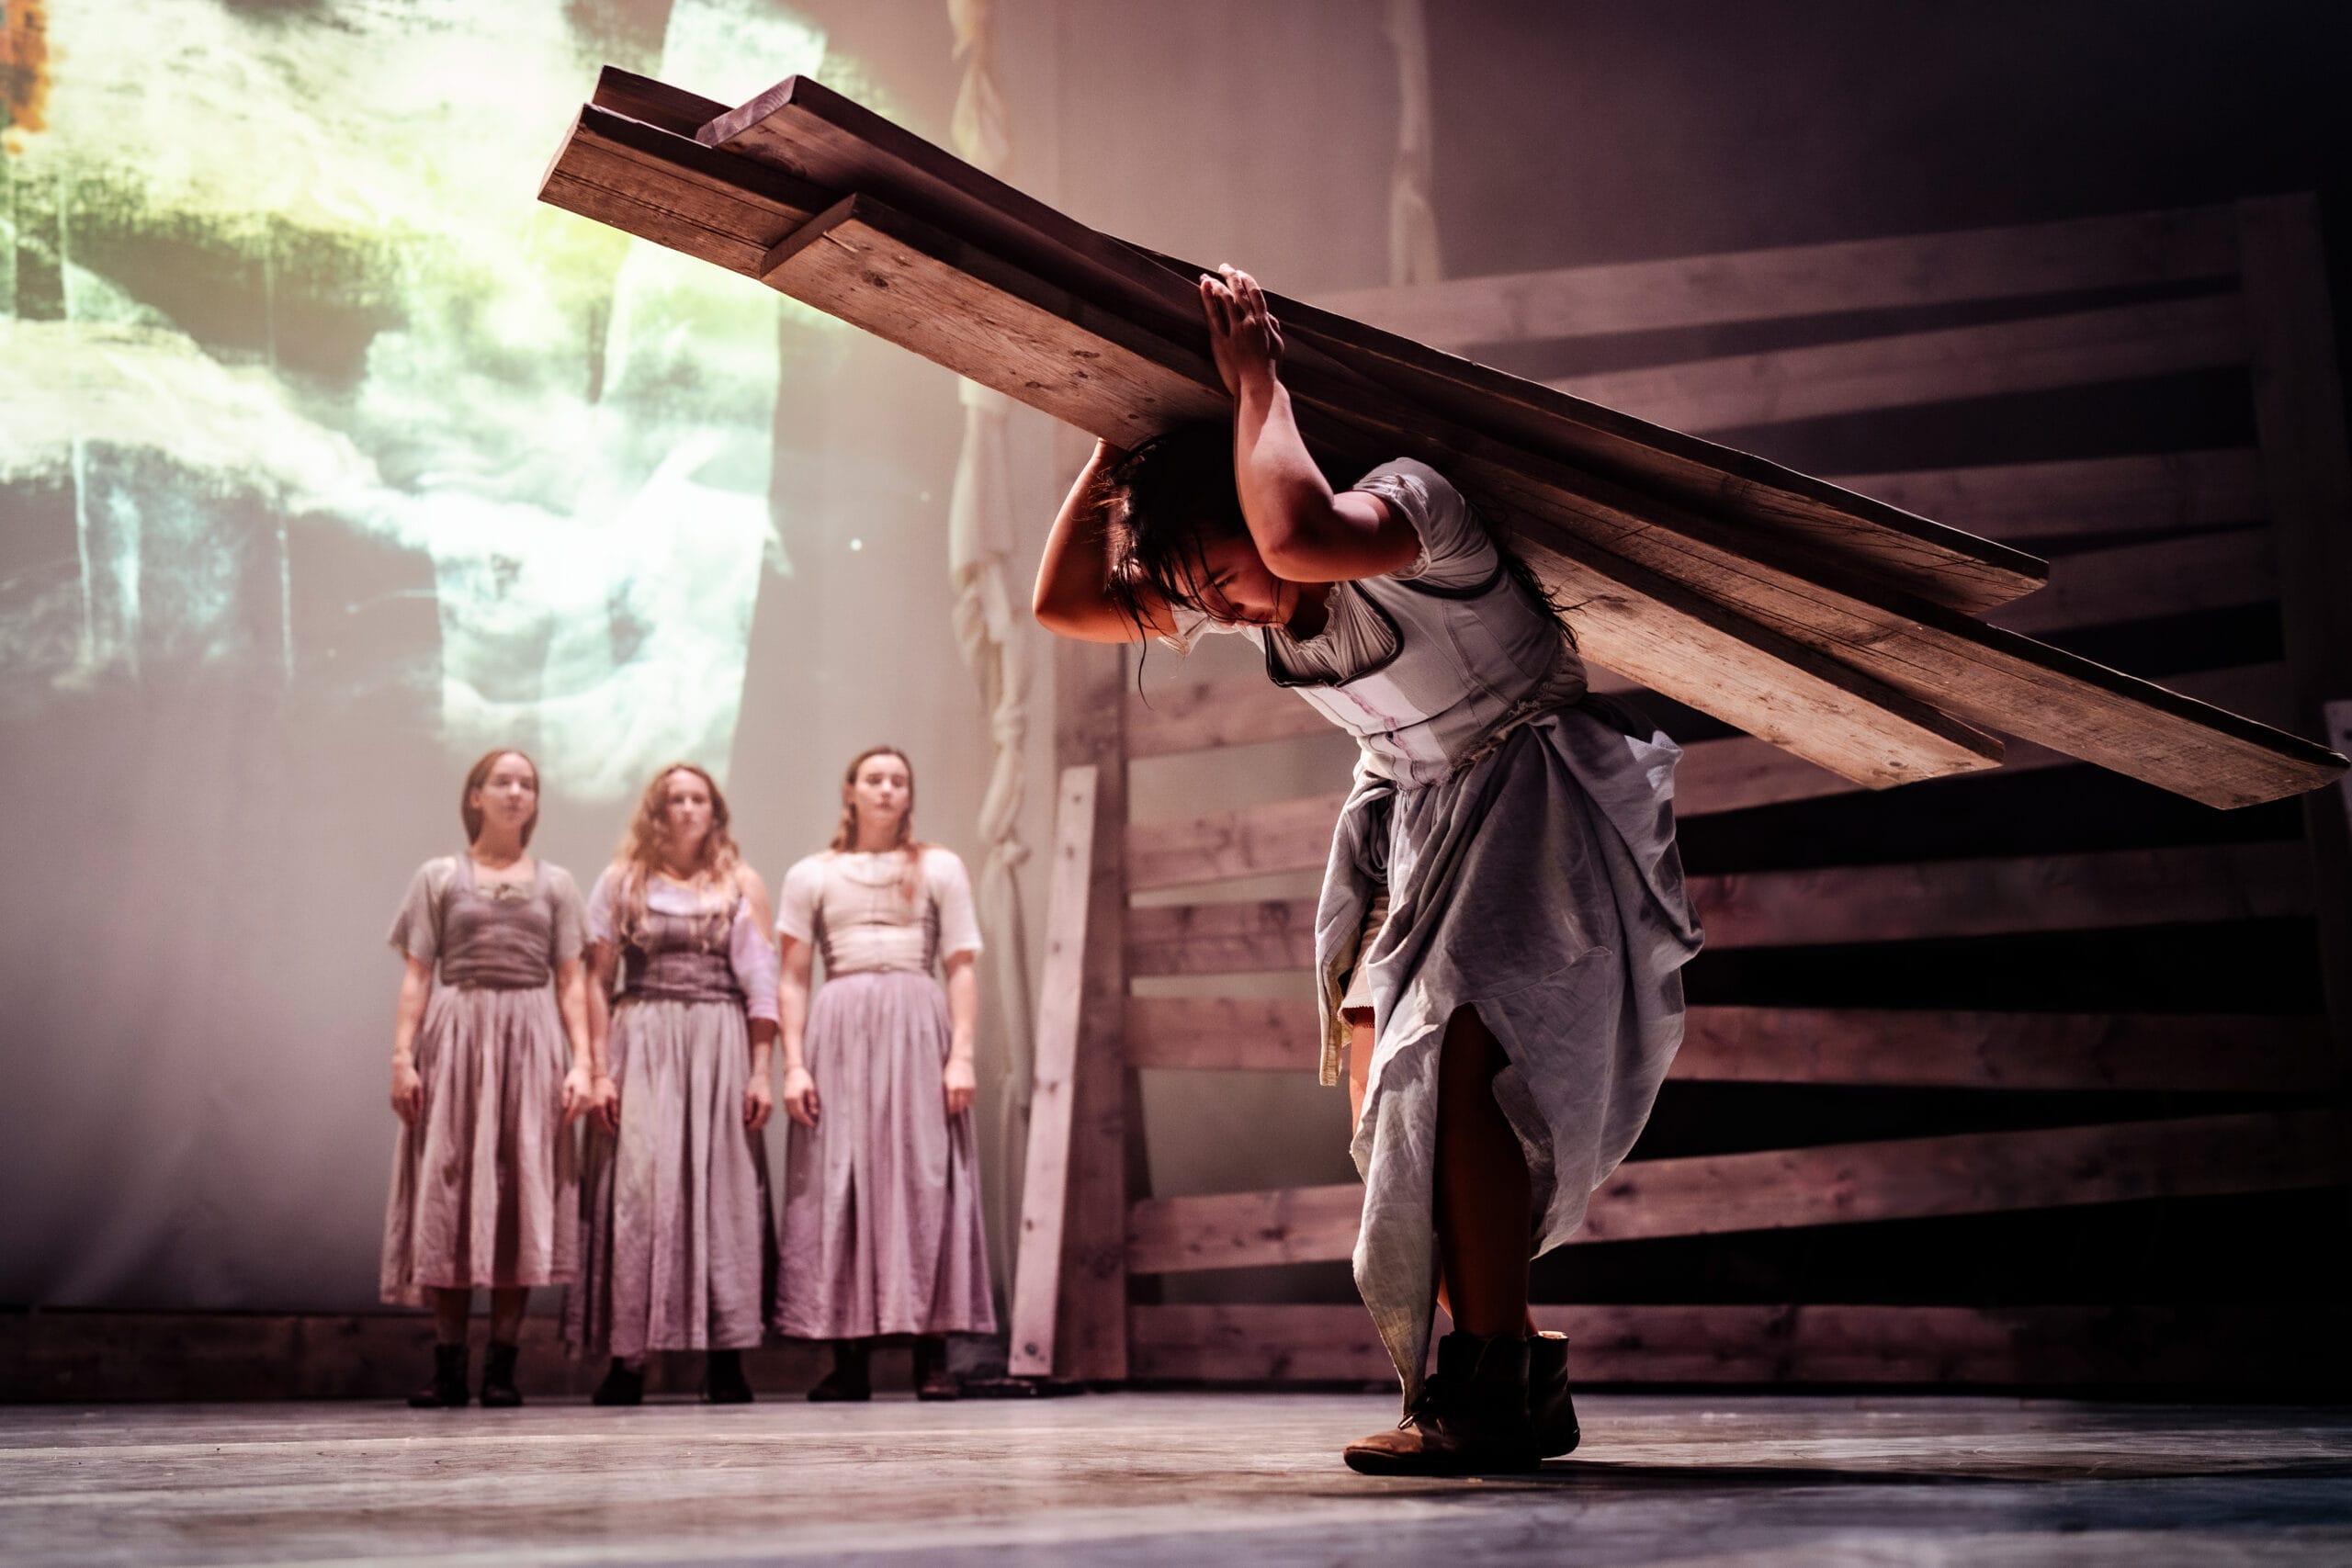 Tess performer holds heavy planks of wood above her head, as female ensemble watch from the background. The image has a lilac tint with deep shadows across Tess as she heaves the weight of the wood on her back.